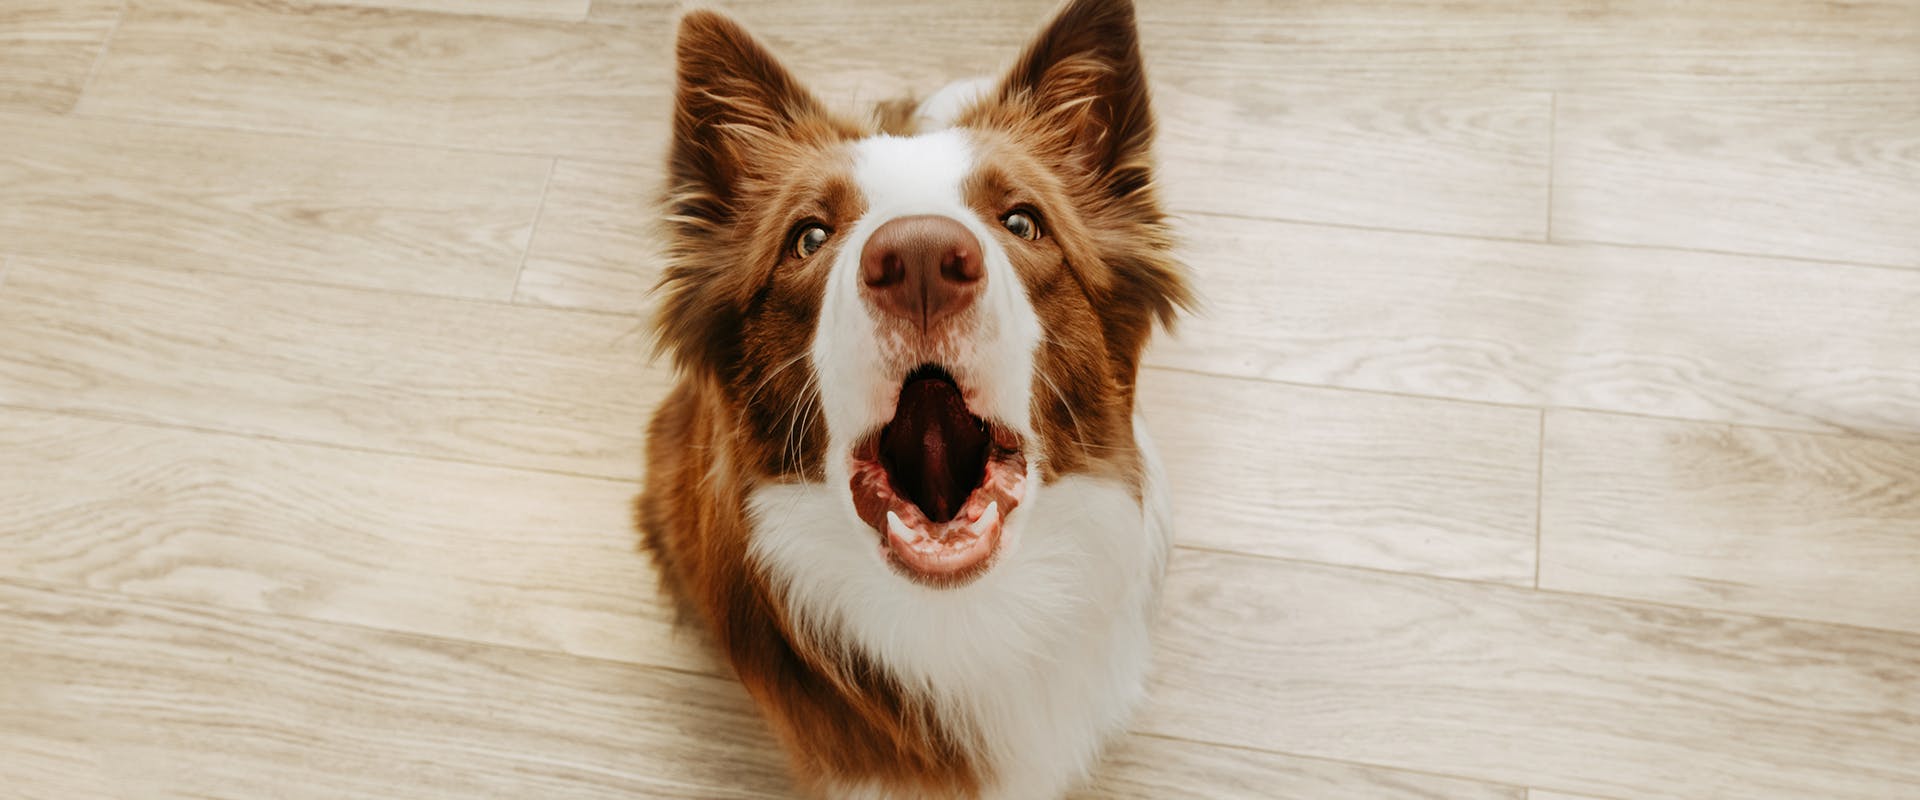 A Collie dog standing with its mouth wide open 